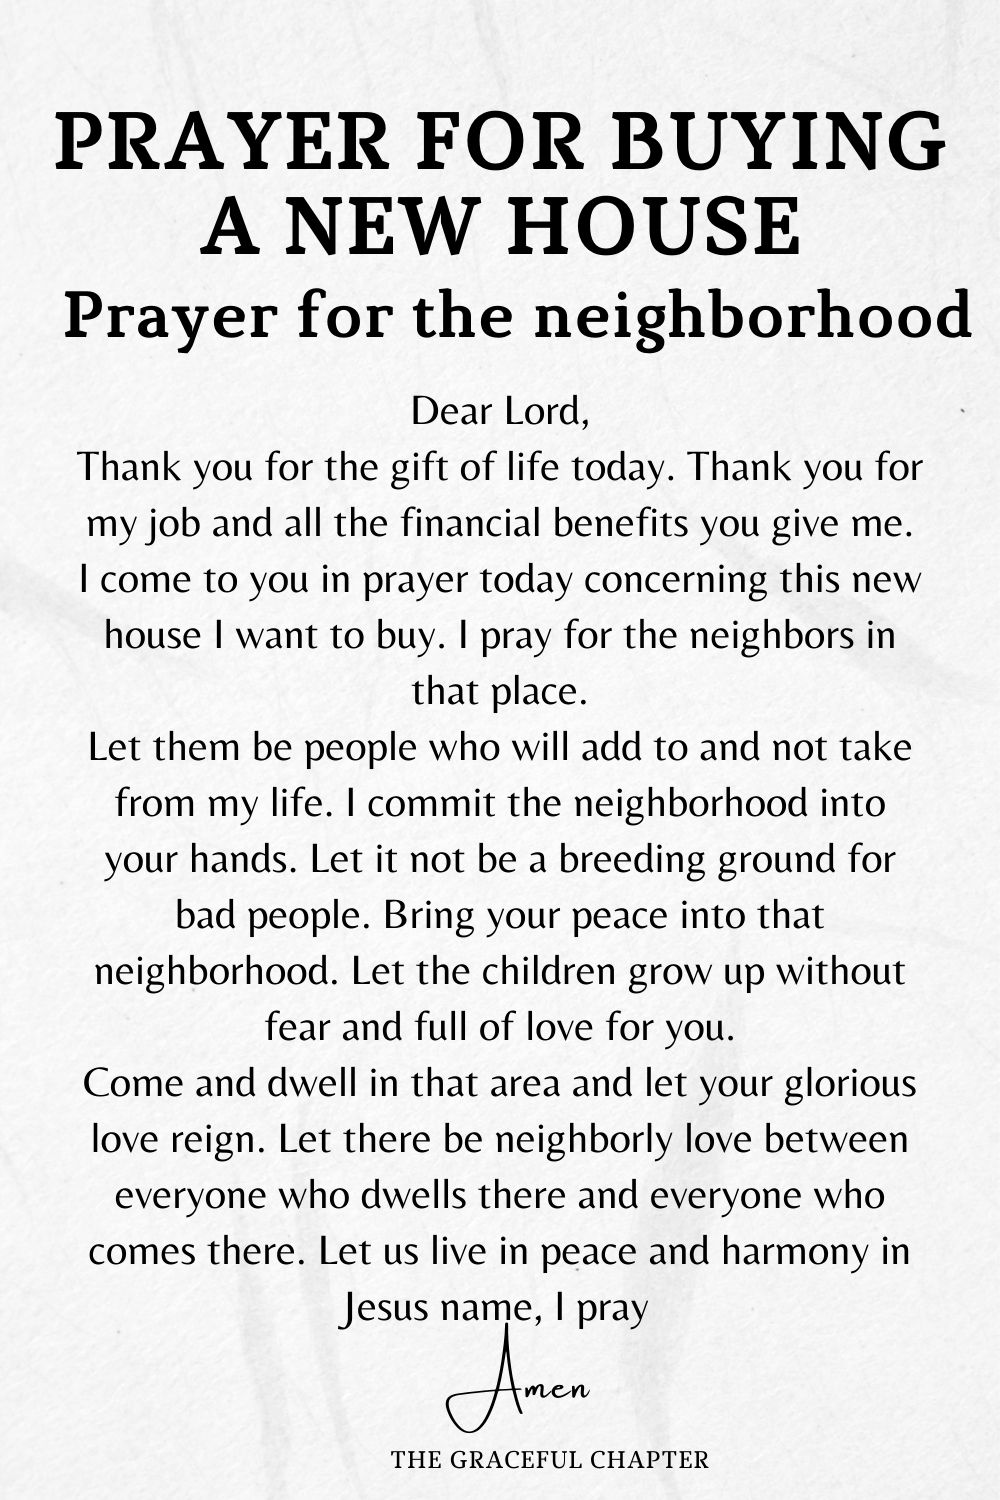 prayers for buying a new house- Prayer for the neighborhood